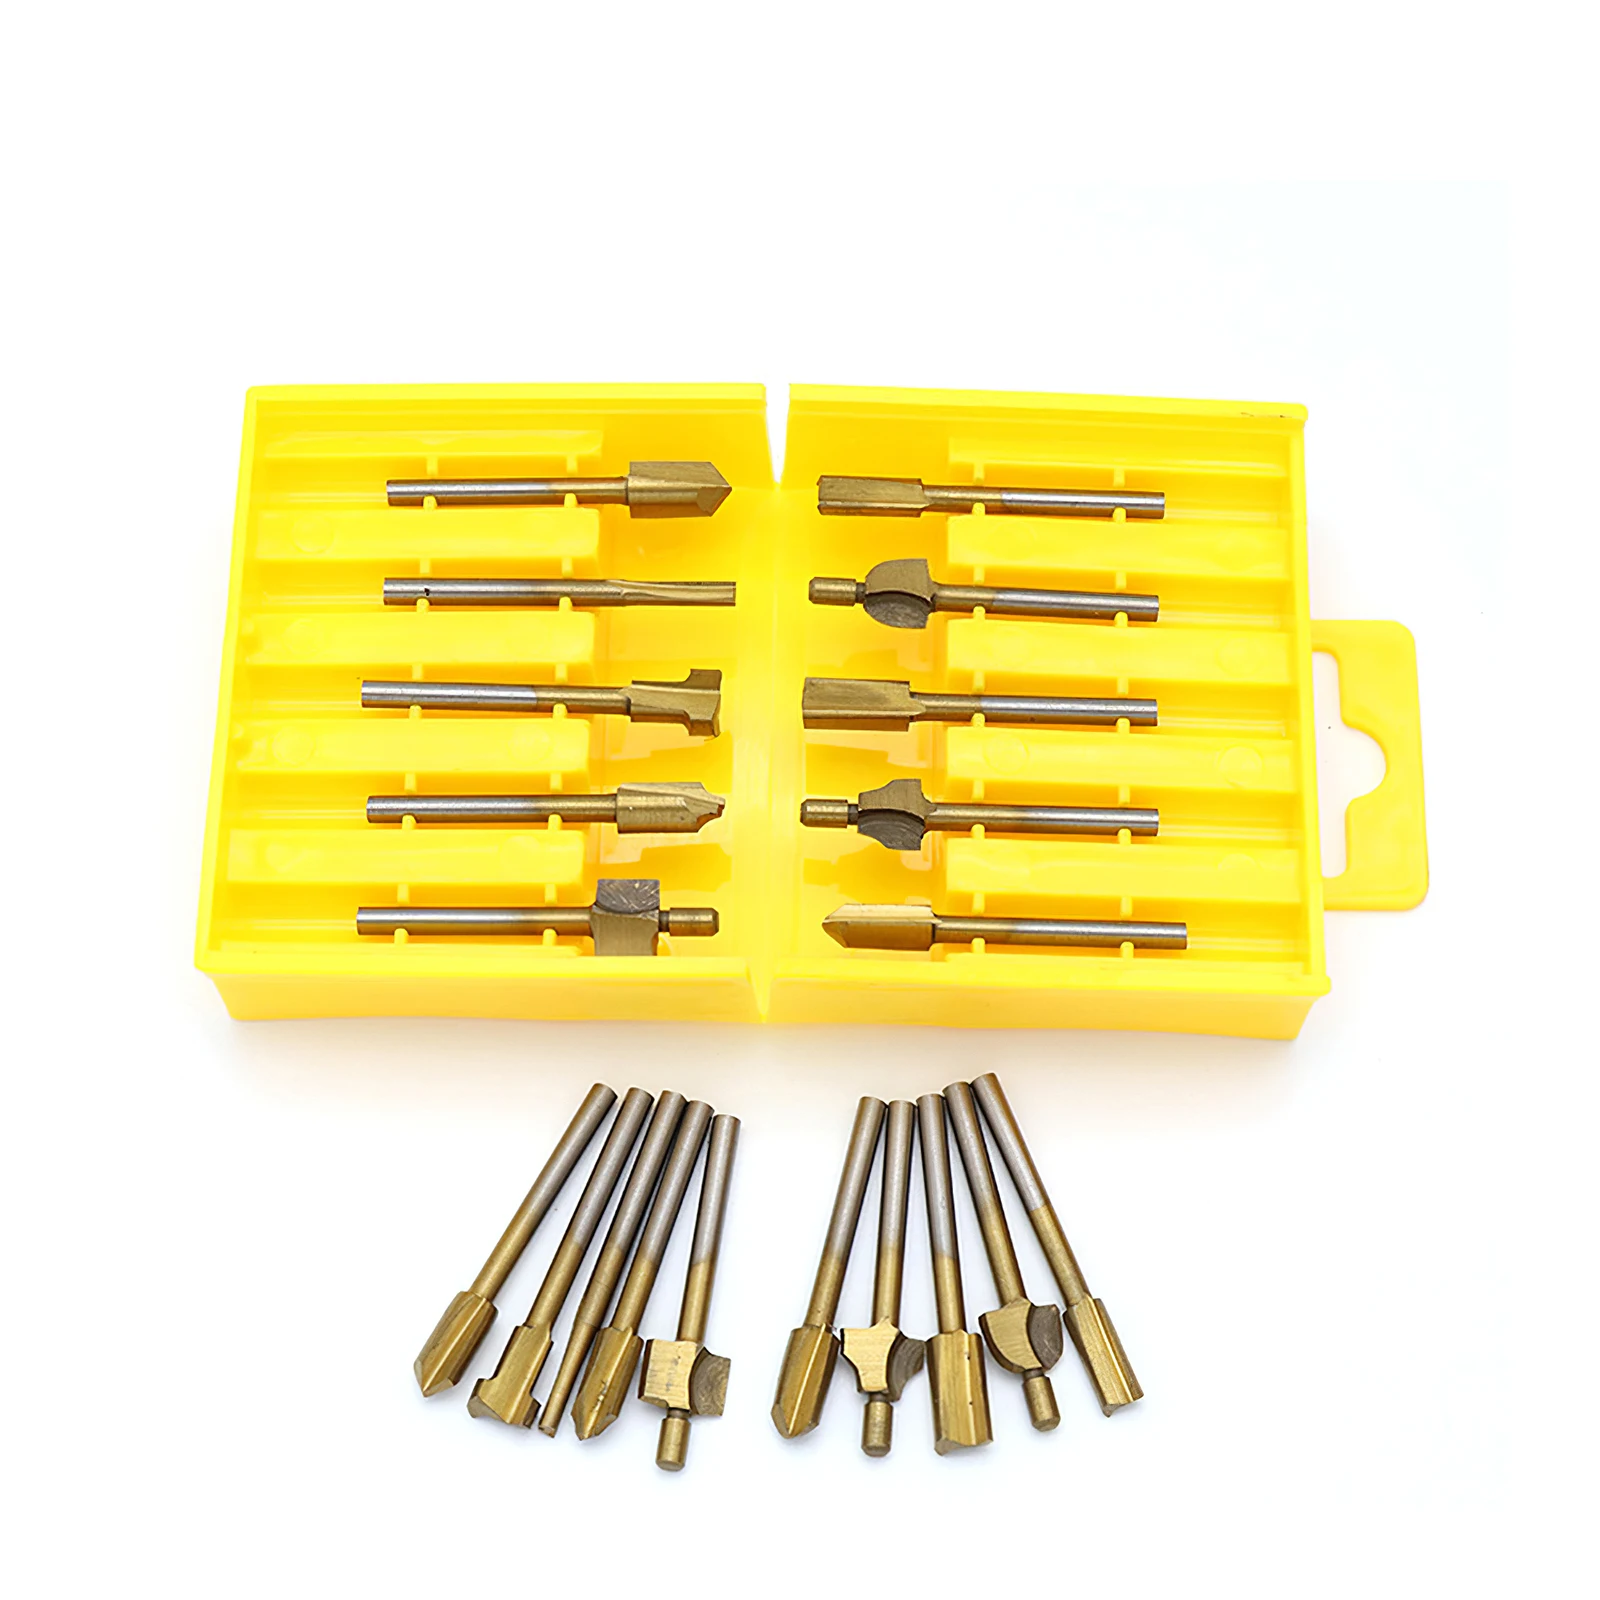 

10pcs HSS Shank Router Bit Straight V Flush Trimming Cleaning Round Corner Cove Box Milling Cutter Woodworking Carving Set